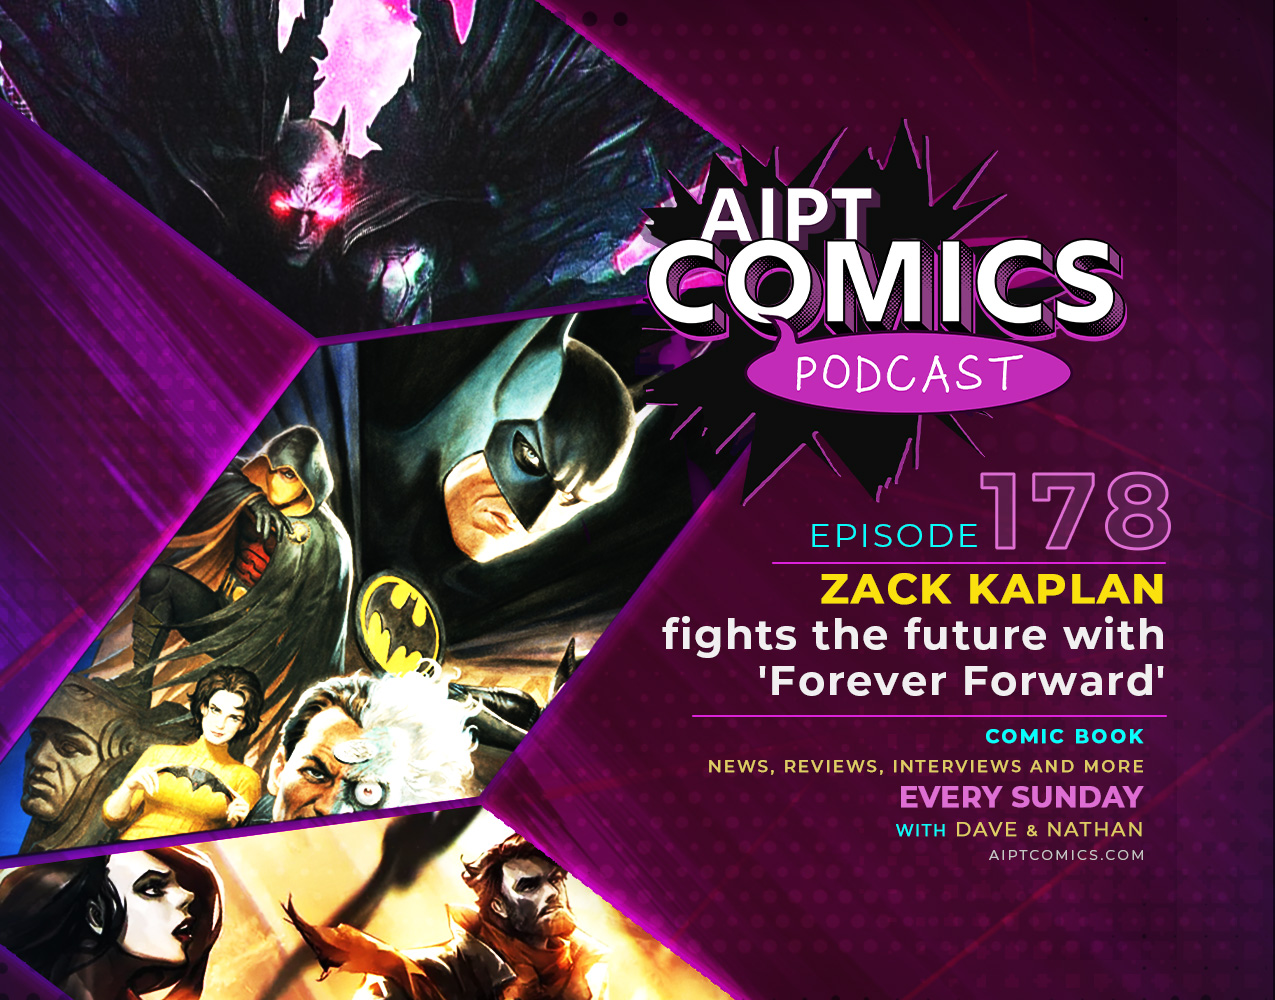 AIPT Comics podcast episode 178: Zack Kaplan fights the future with 'Forever Forward'